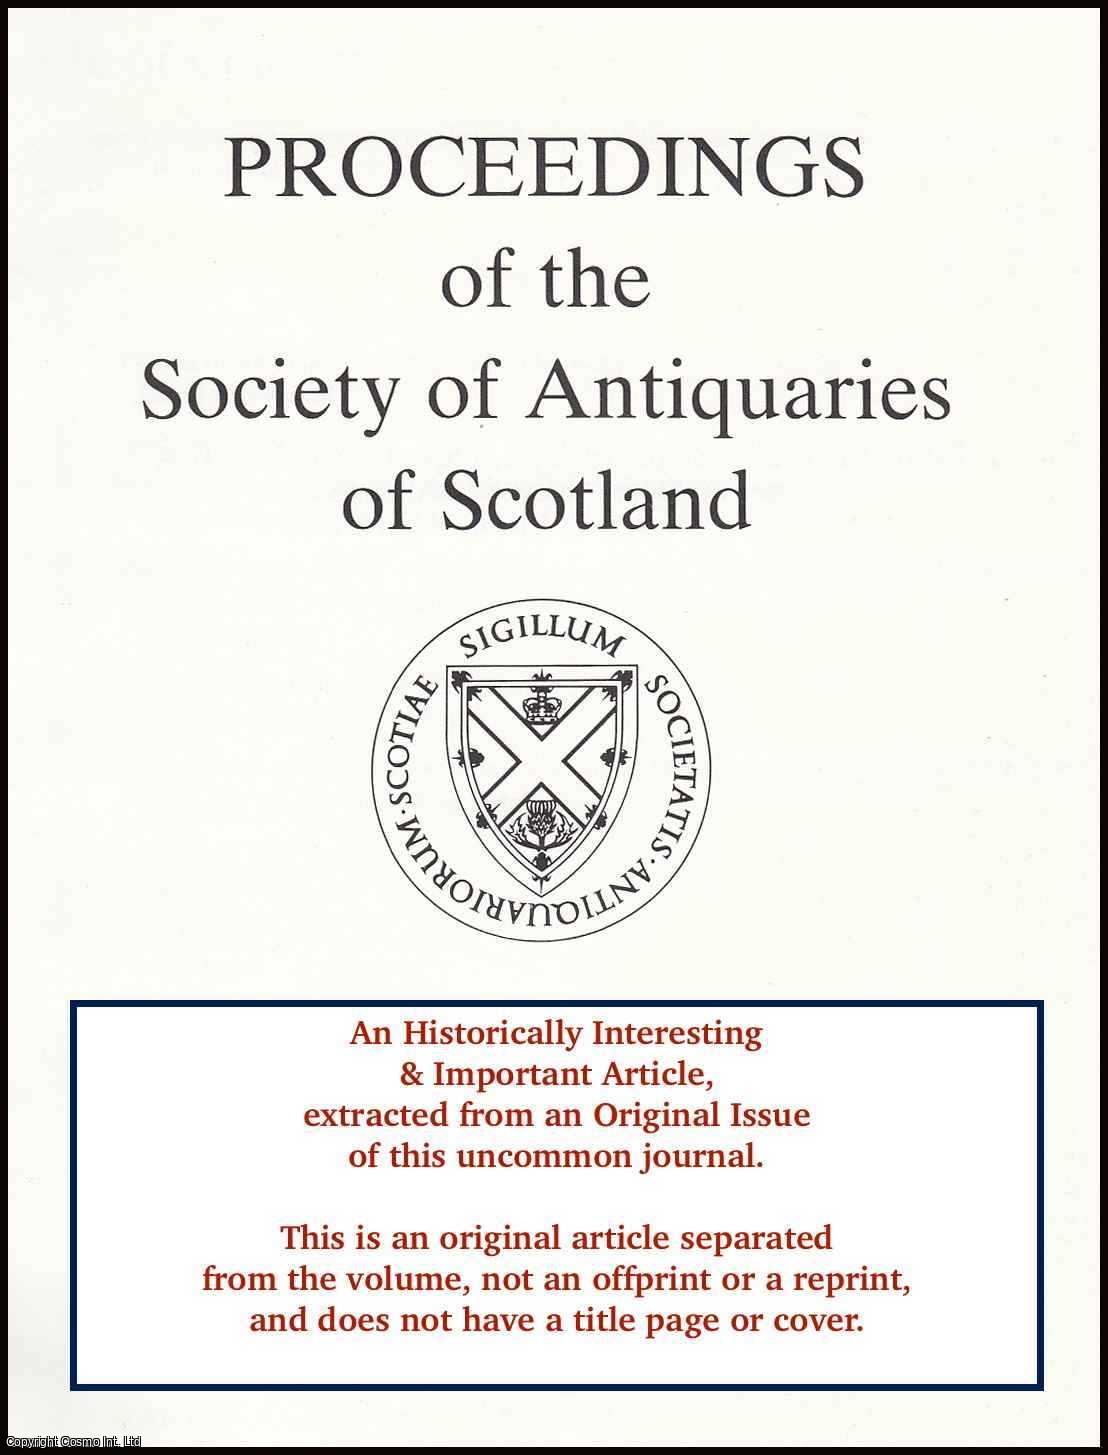 G.J. Barclay, G. S. Maxwell & Coralie Mills - Excavation of a Neolithic Long Mortuary Enclosure Within The Roman Legionary Fortress at Inchtuthil, Perthshire. An original article from the Proceedings of the Society of Antiquaries of Scotland, 1991.